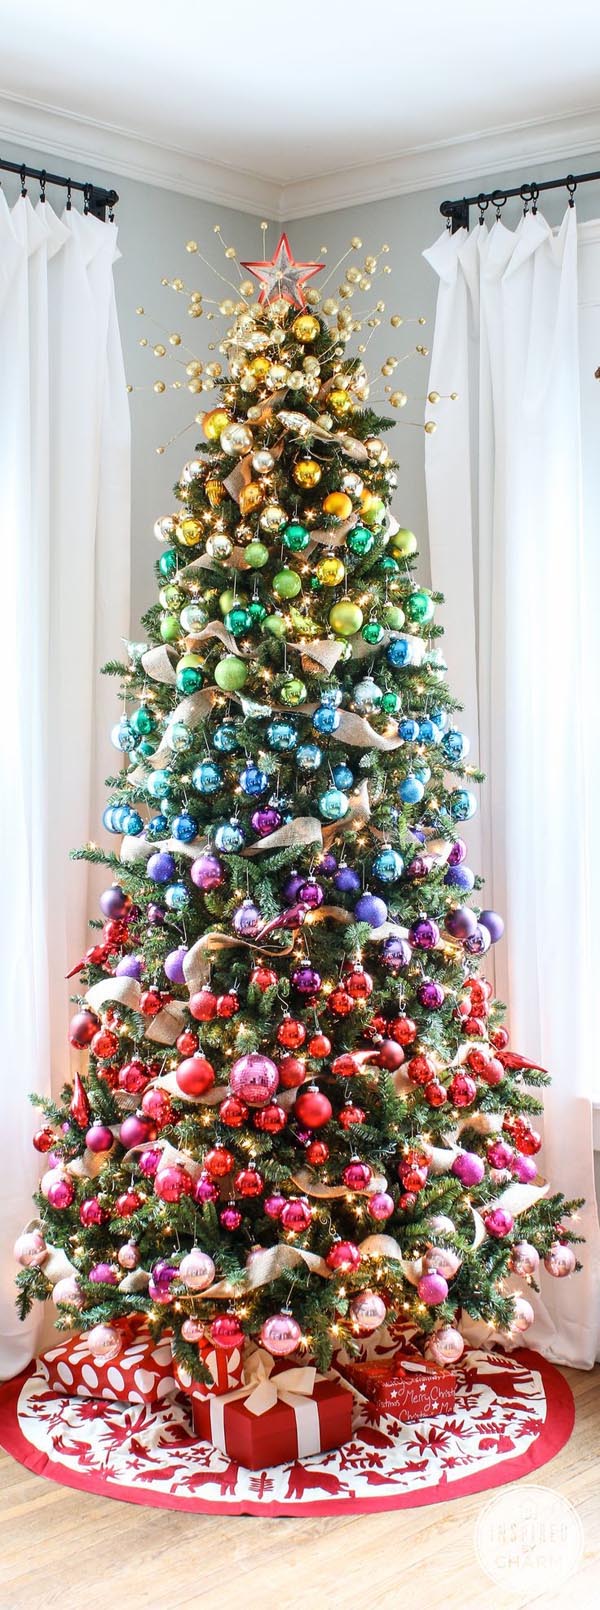 5 Christmas Tree Ideas Kids and Adults Will Both Love -- So easy and pretty! 